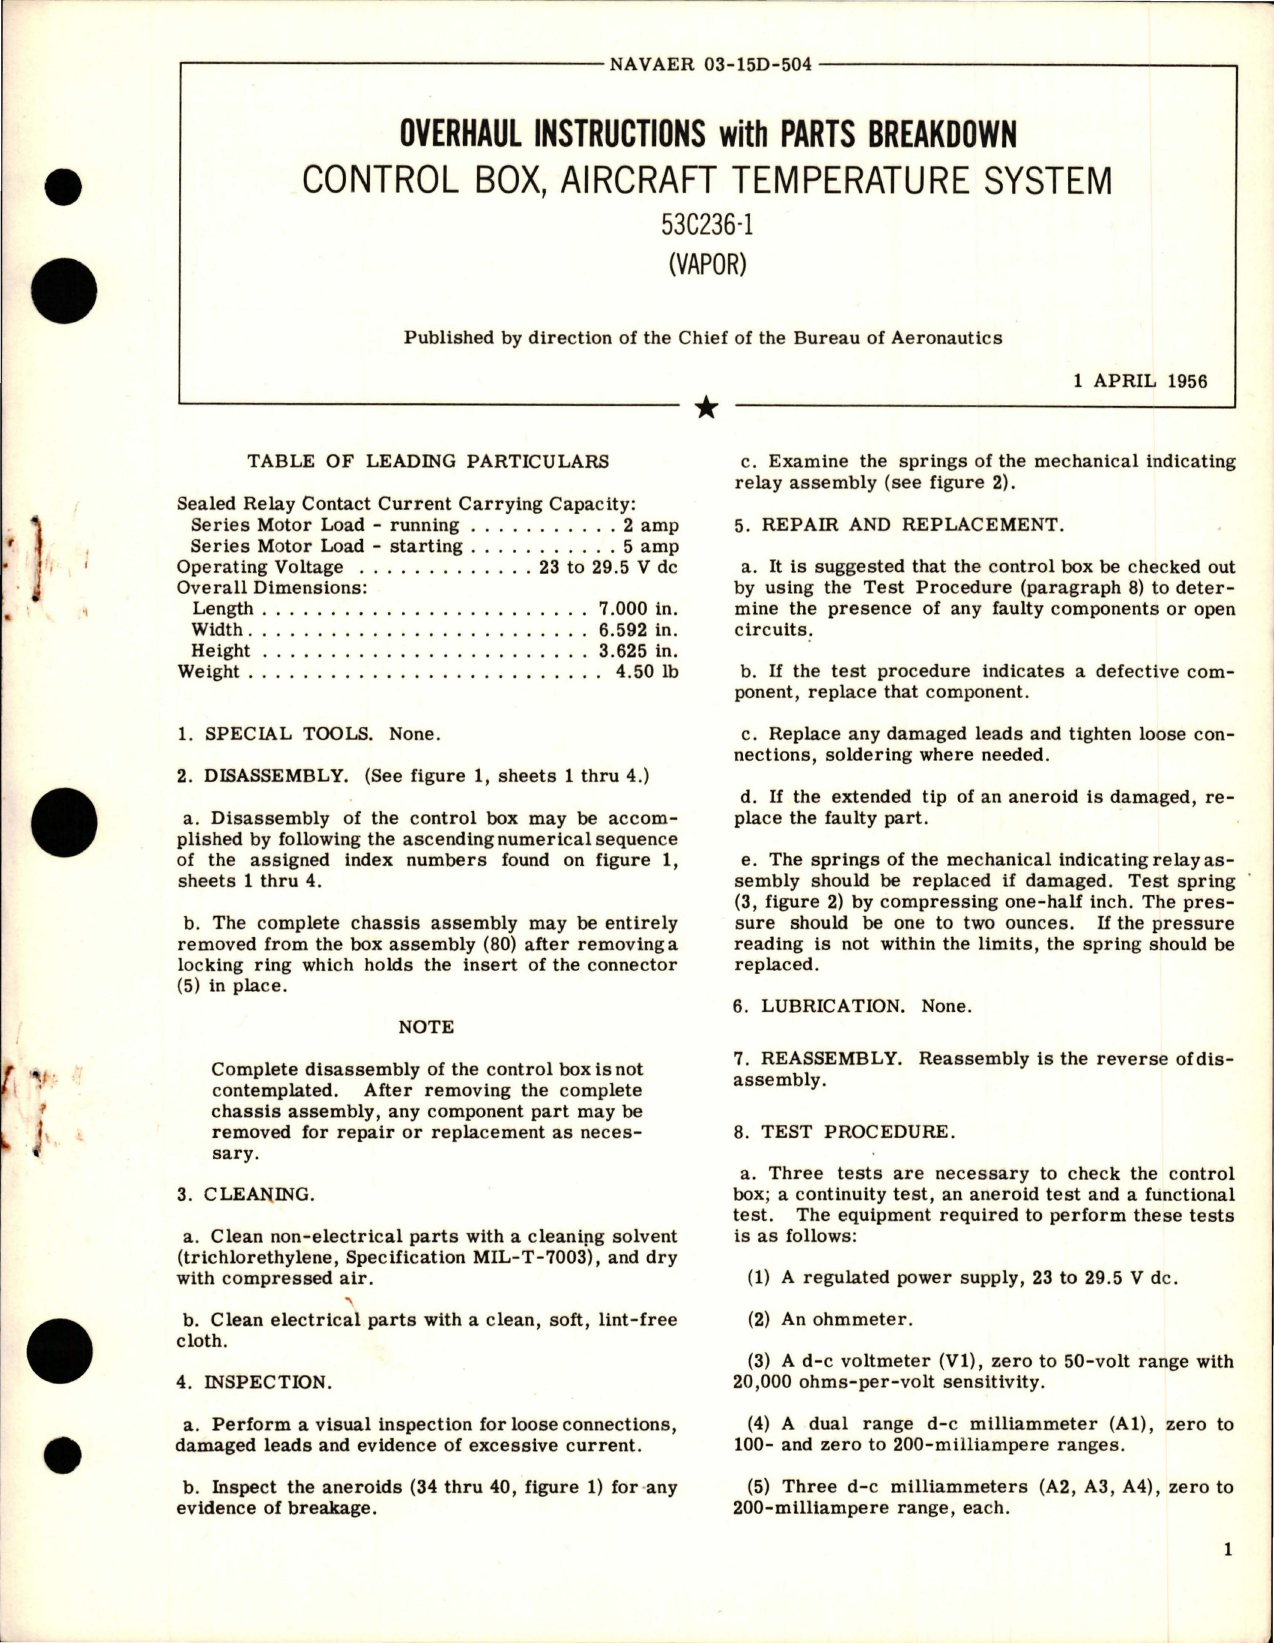 Sample page 1 from AirCorps Library document: Overhaul Instructions with Parts for Temperature System Control Box - 53C236-1